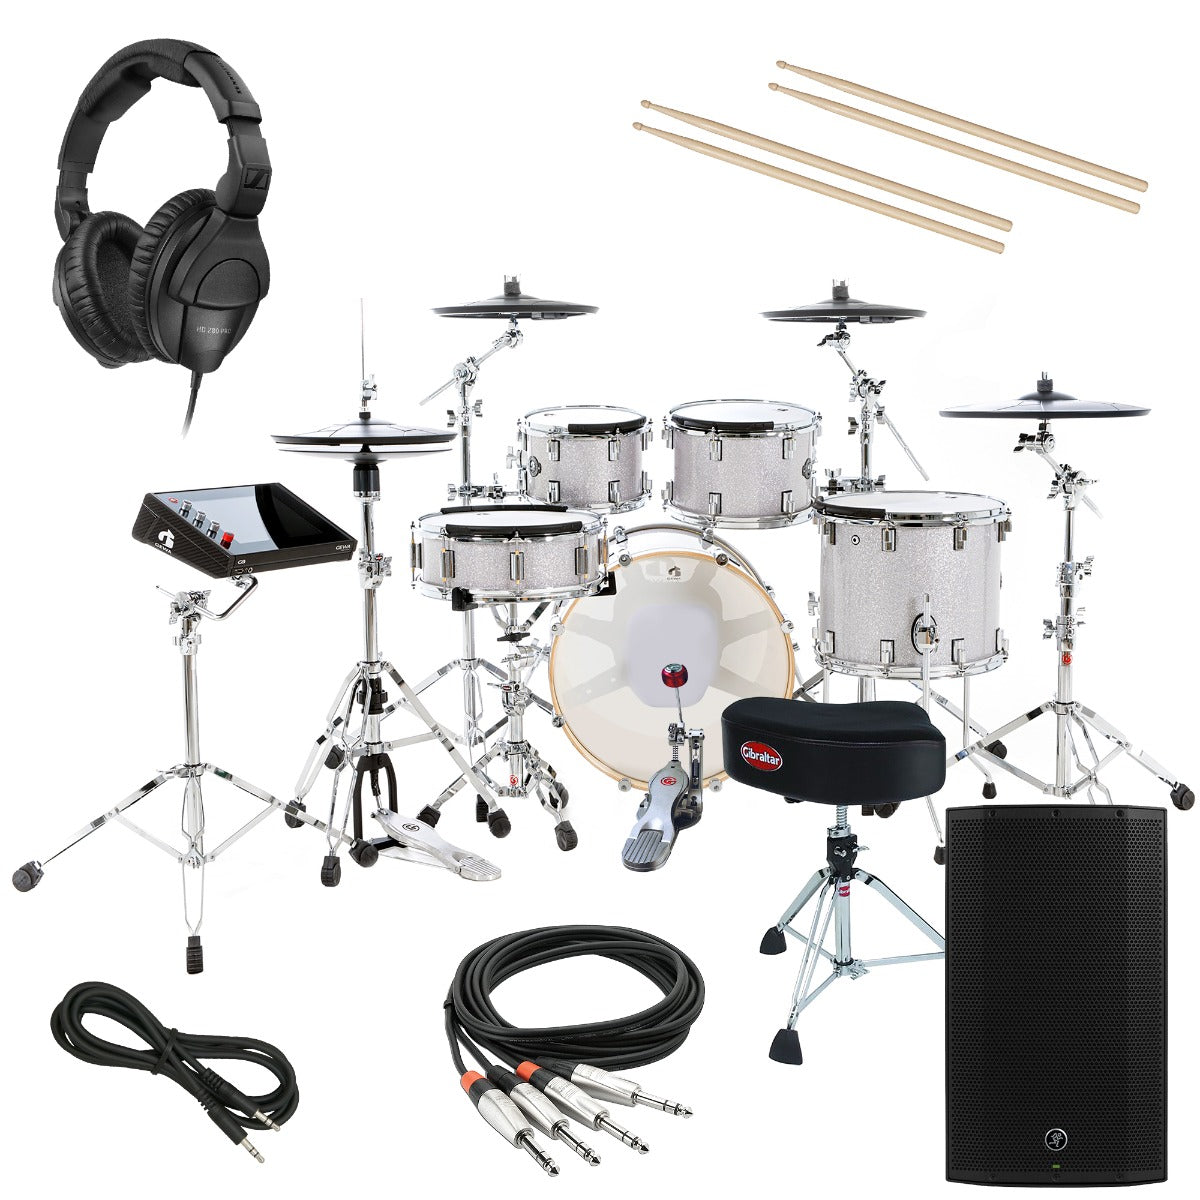 Collage of the 
GEWA G9 Pro 5 SE Electronic Drum Set - Silver Sparkle COMPLETE DRUM BUNDLE
 showing included components